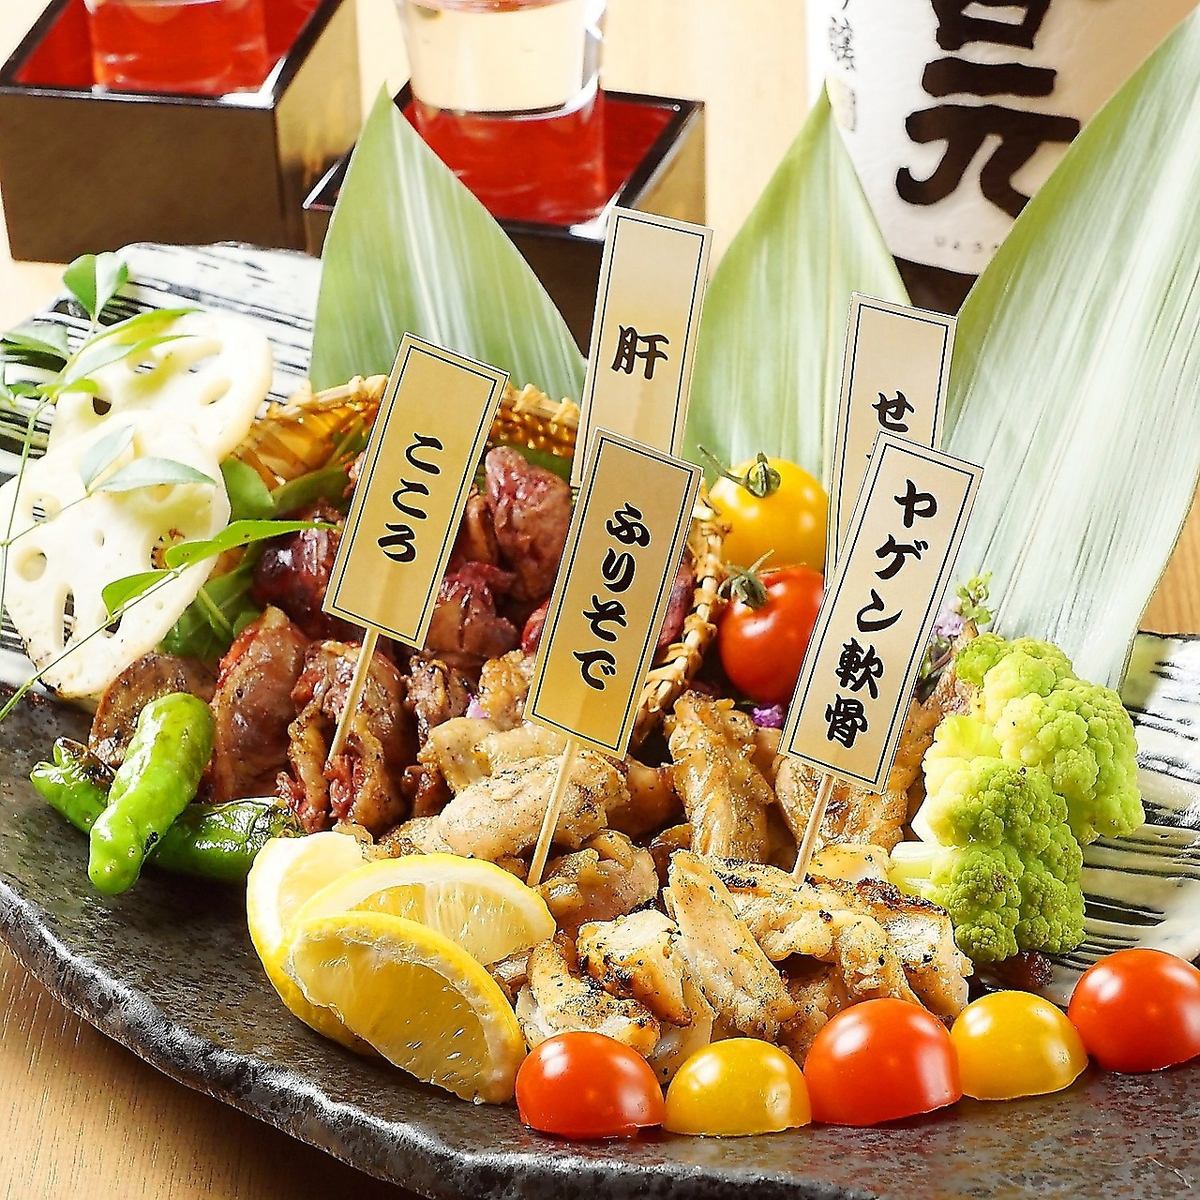 Popular all-you-can-eat and drink course! From 3,500 yen, perfect for a drinking party!